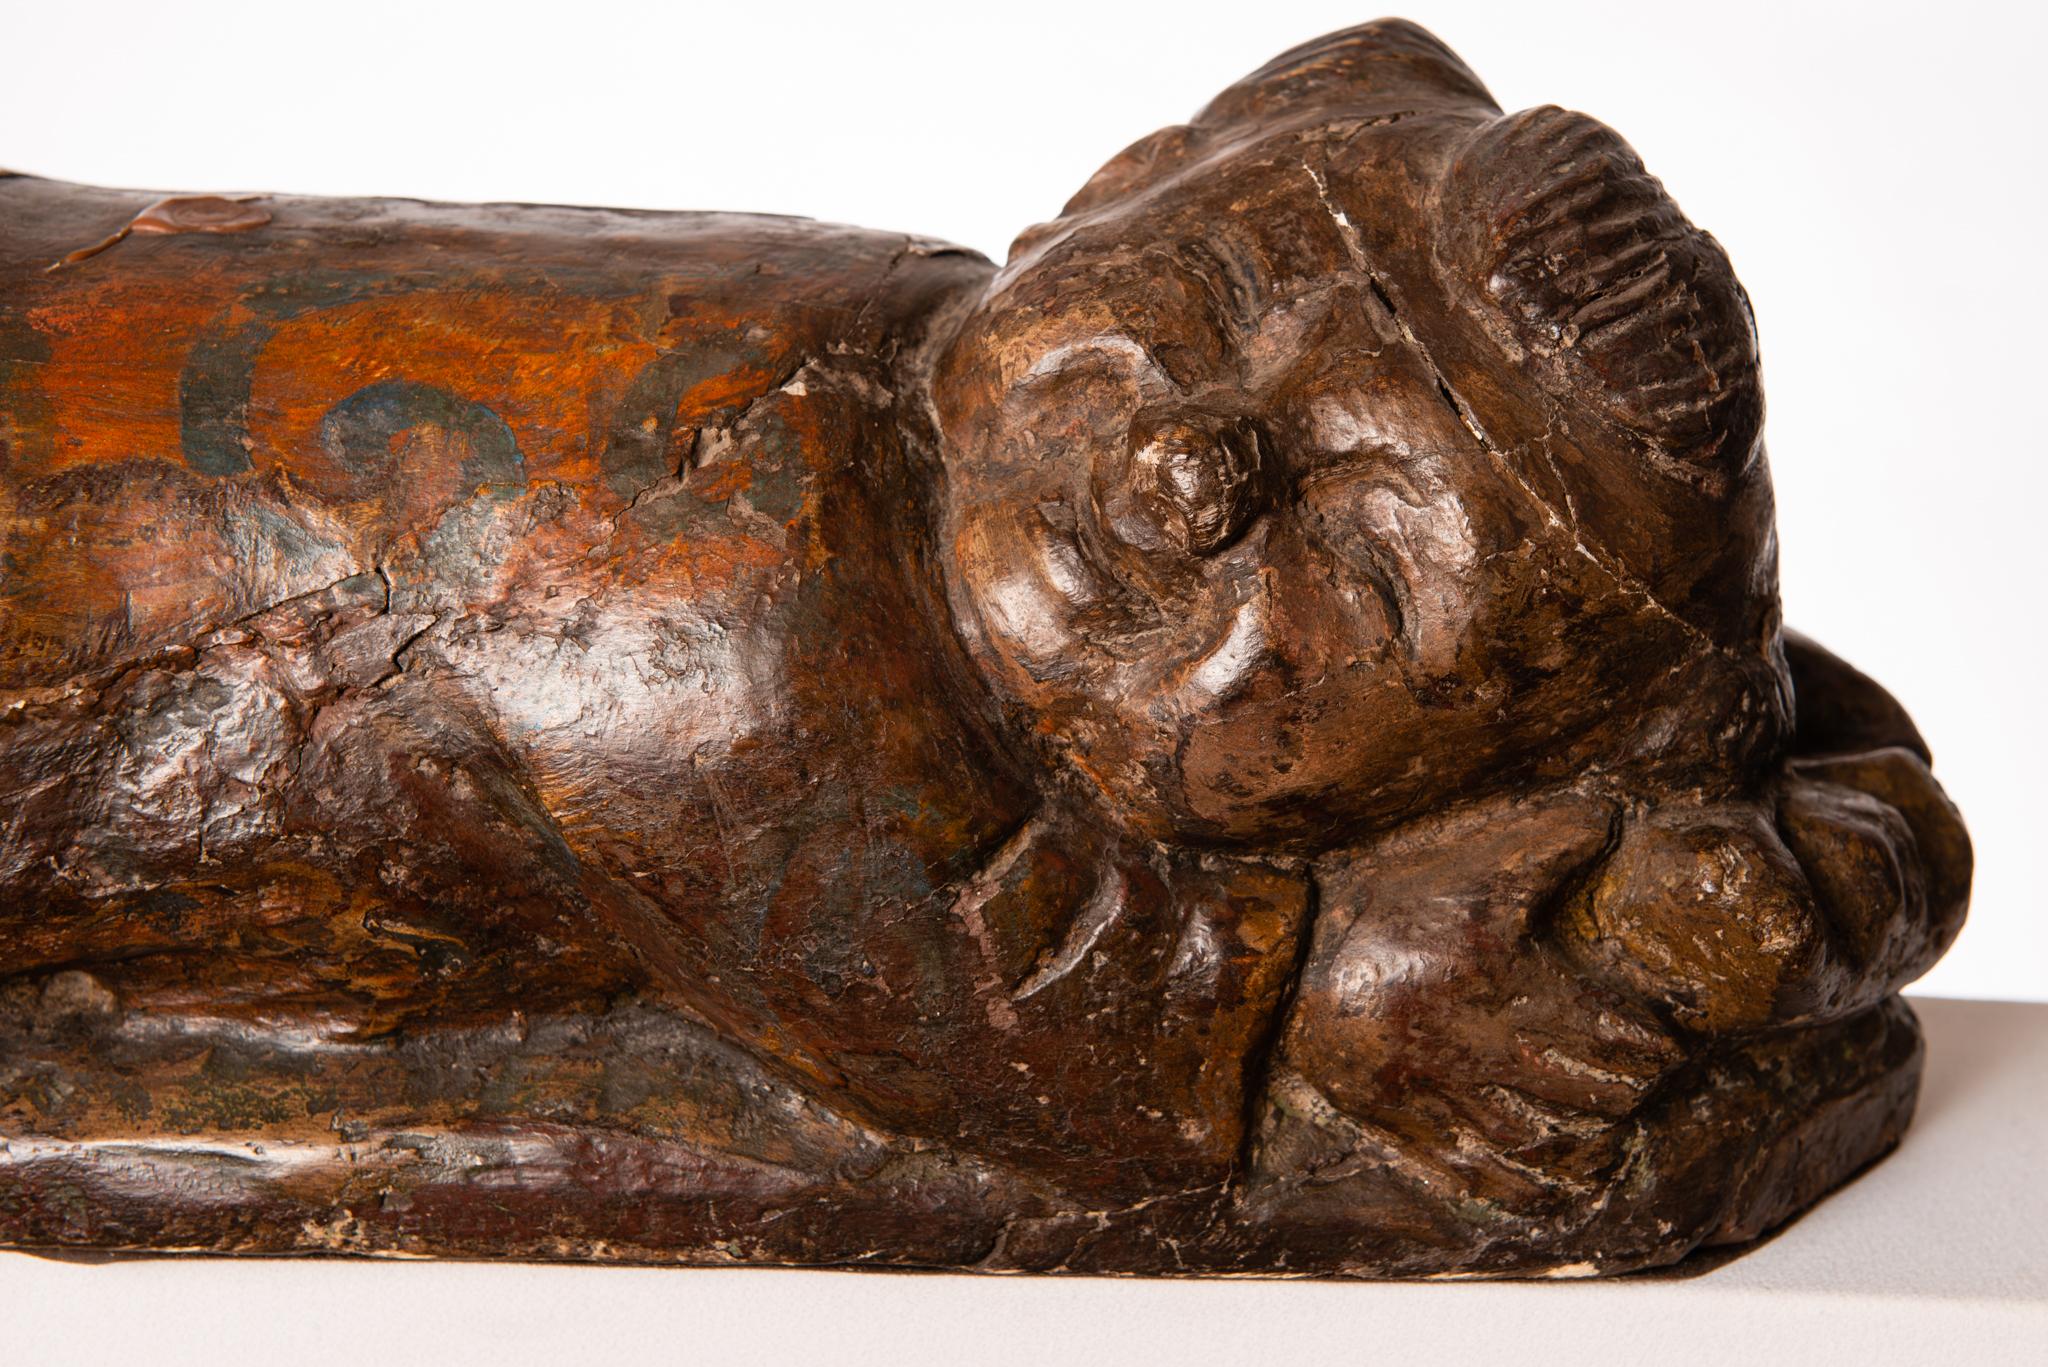 Enjoyable wooden statue with a smiling sleeping Chinese baby, with the head resting on a pillow.
This was used as a head rest for elaborate hairstyles of Chinese nobles.
O/5303.